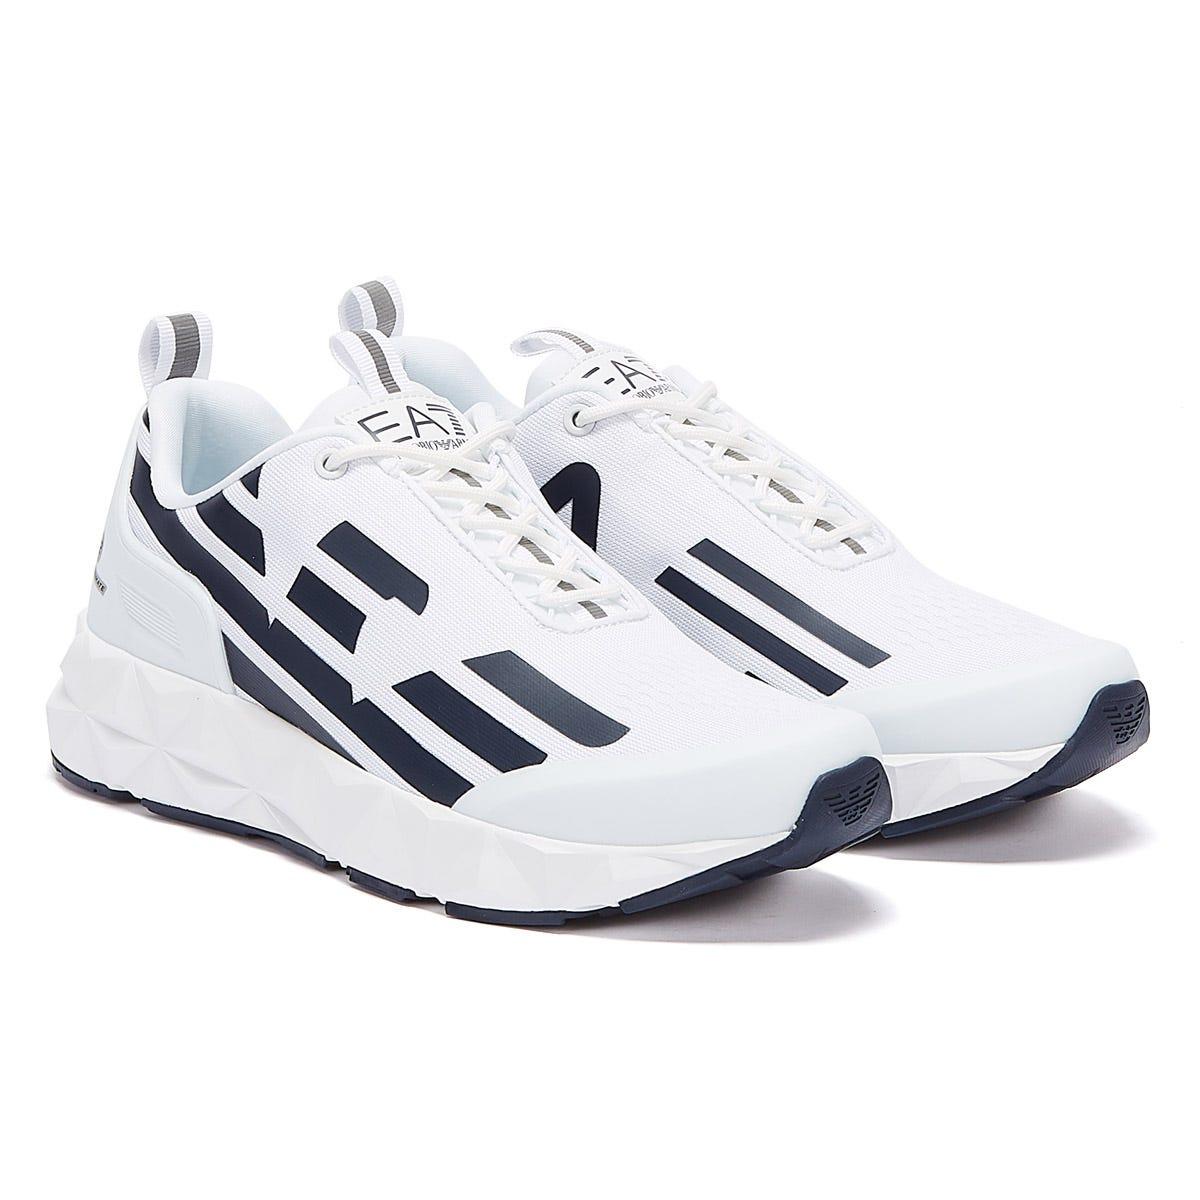 Emporio Armani Ea7 Ultimate C2 Kombat Mens White / Navy Trainers for ...